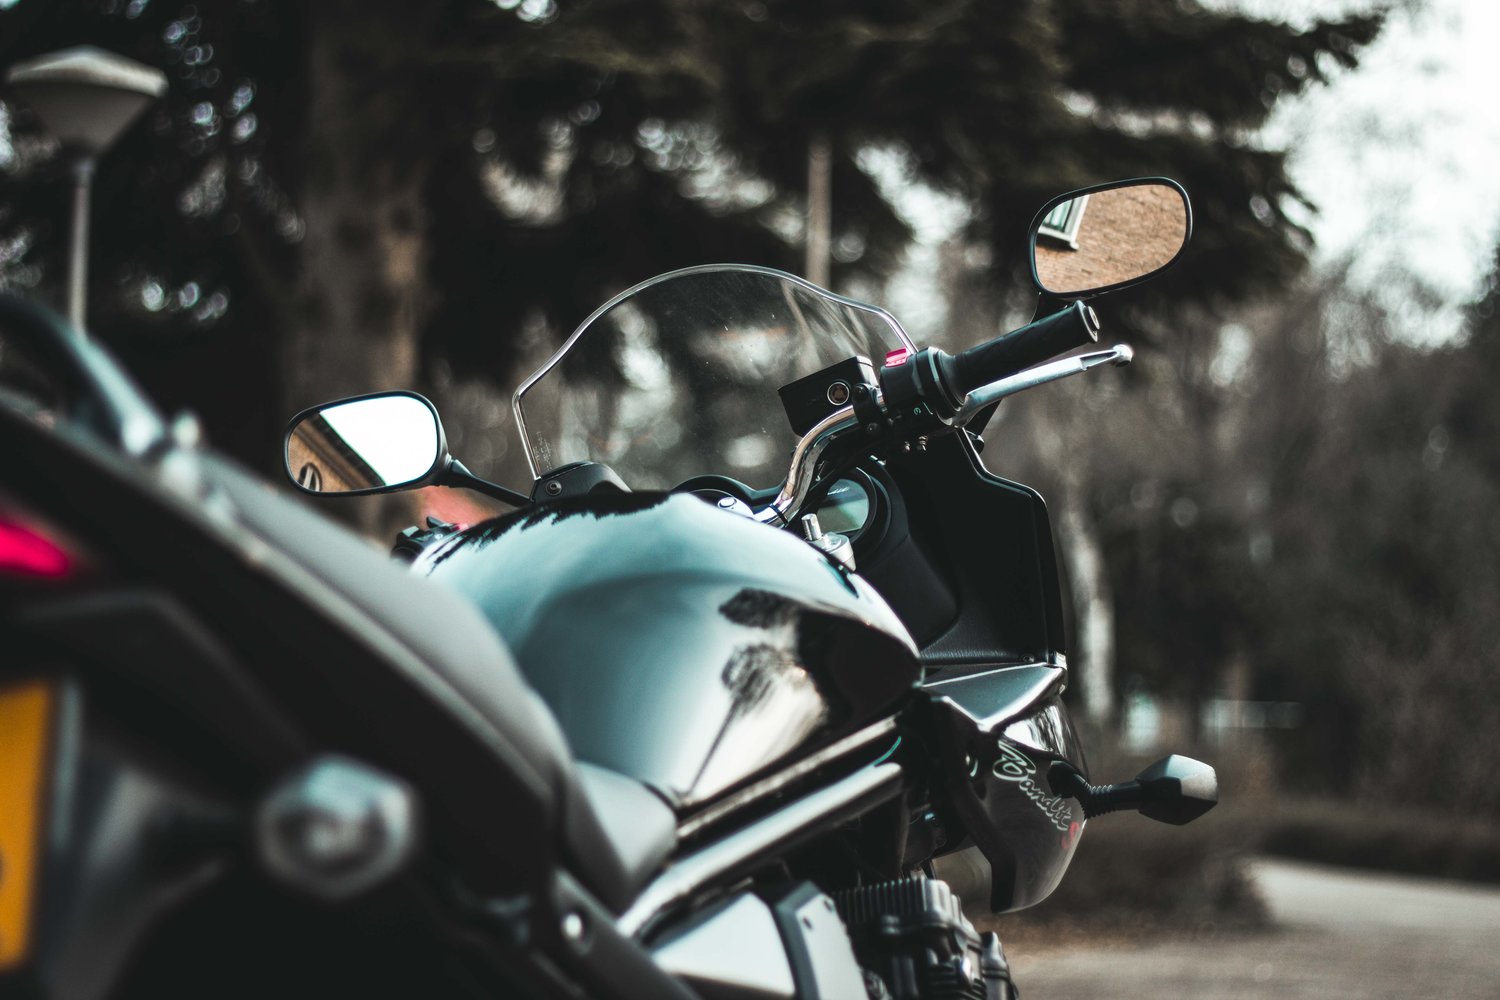 How To Get a Motorcycle License in New Jersey